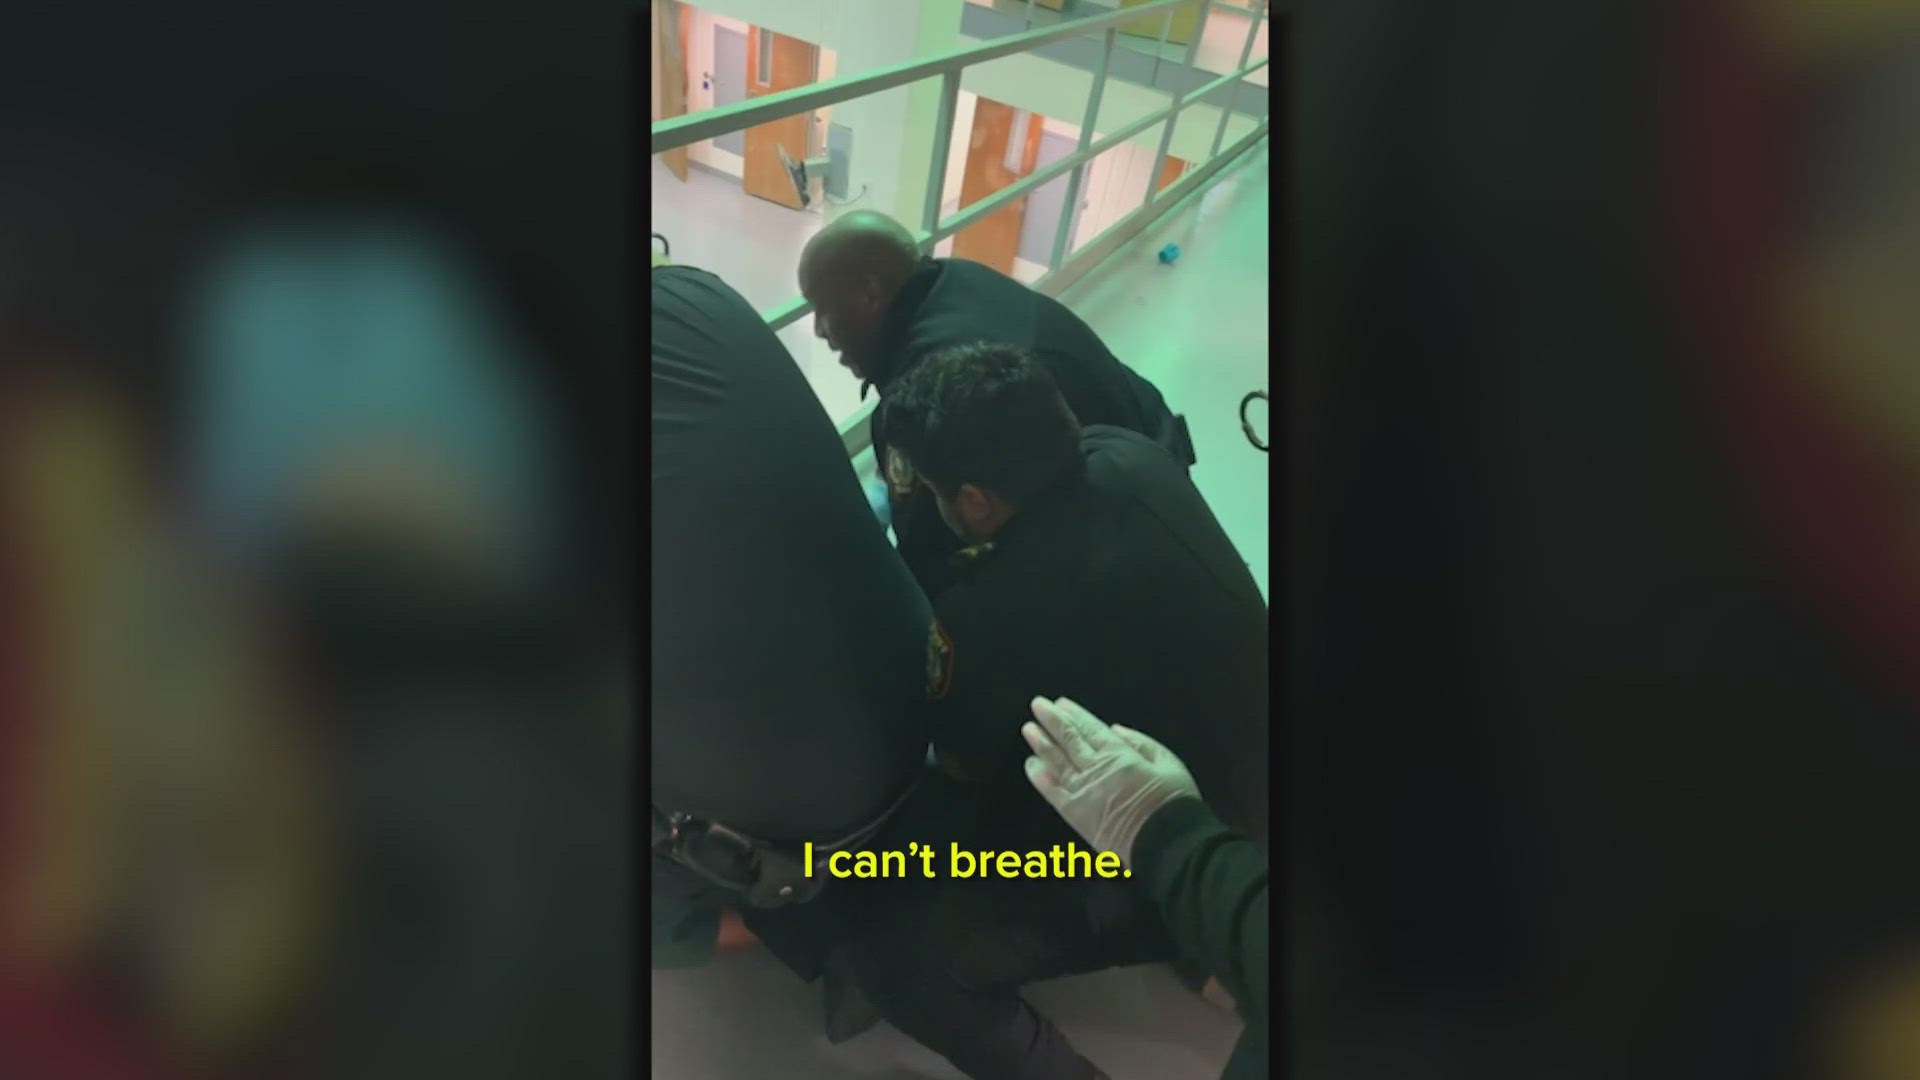 The attorney also said the unreleased video will show that JPS jail medical staff appeared to initially think Johnson was faking a medical emergency.